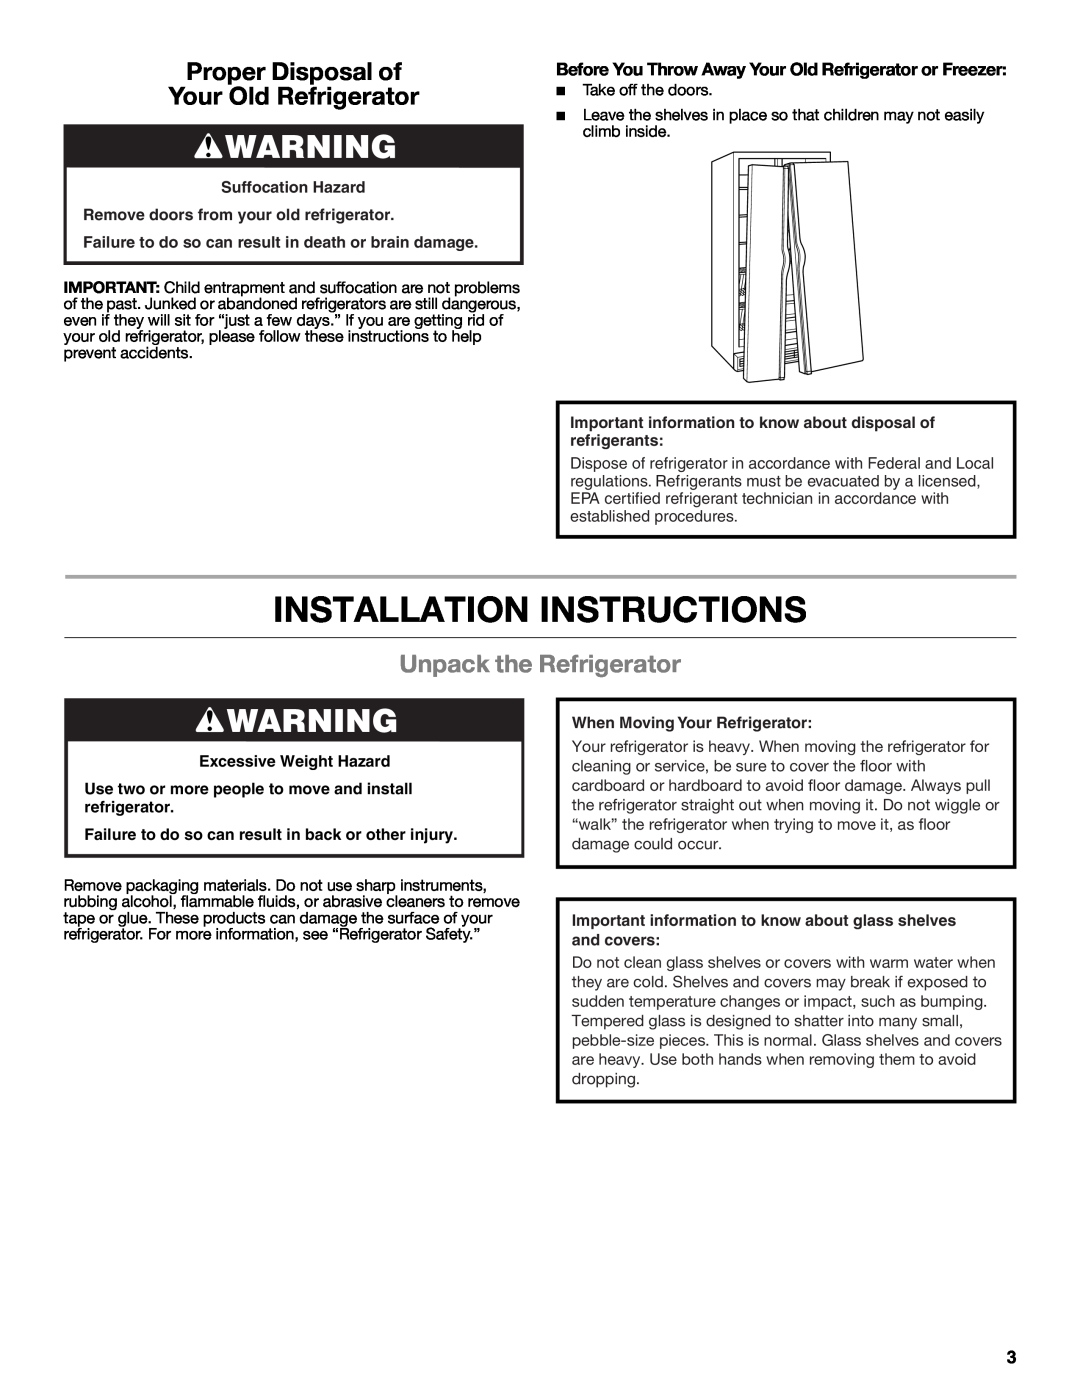 Whirlpool WRS325FNAM Installation Instructions, Proper Disposal of Your Old Refrigerator, Unpack the Refrigerator 